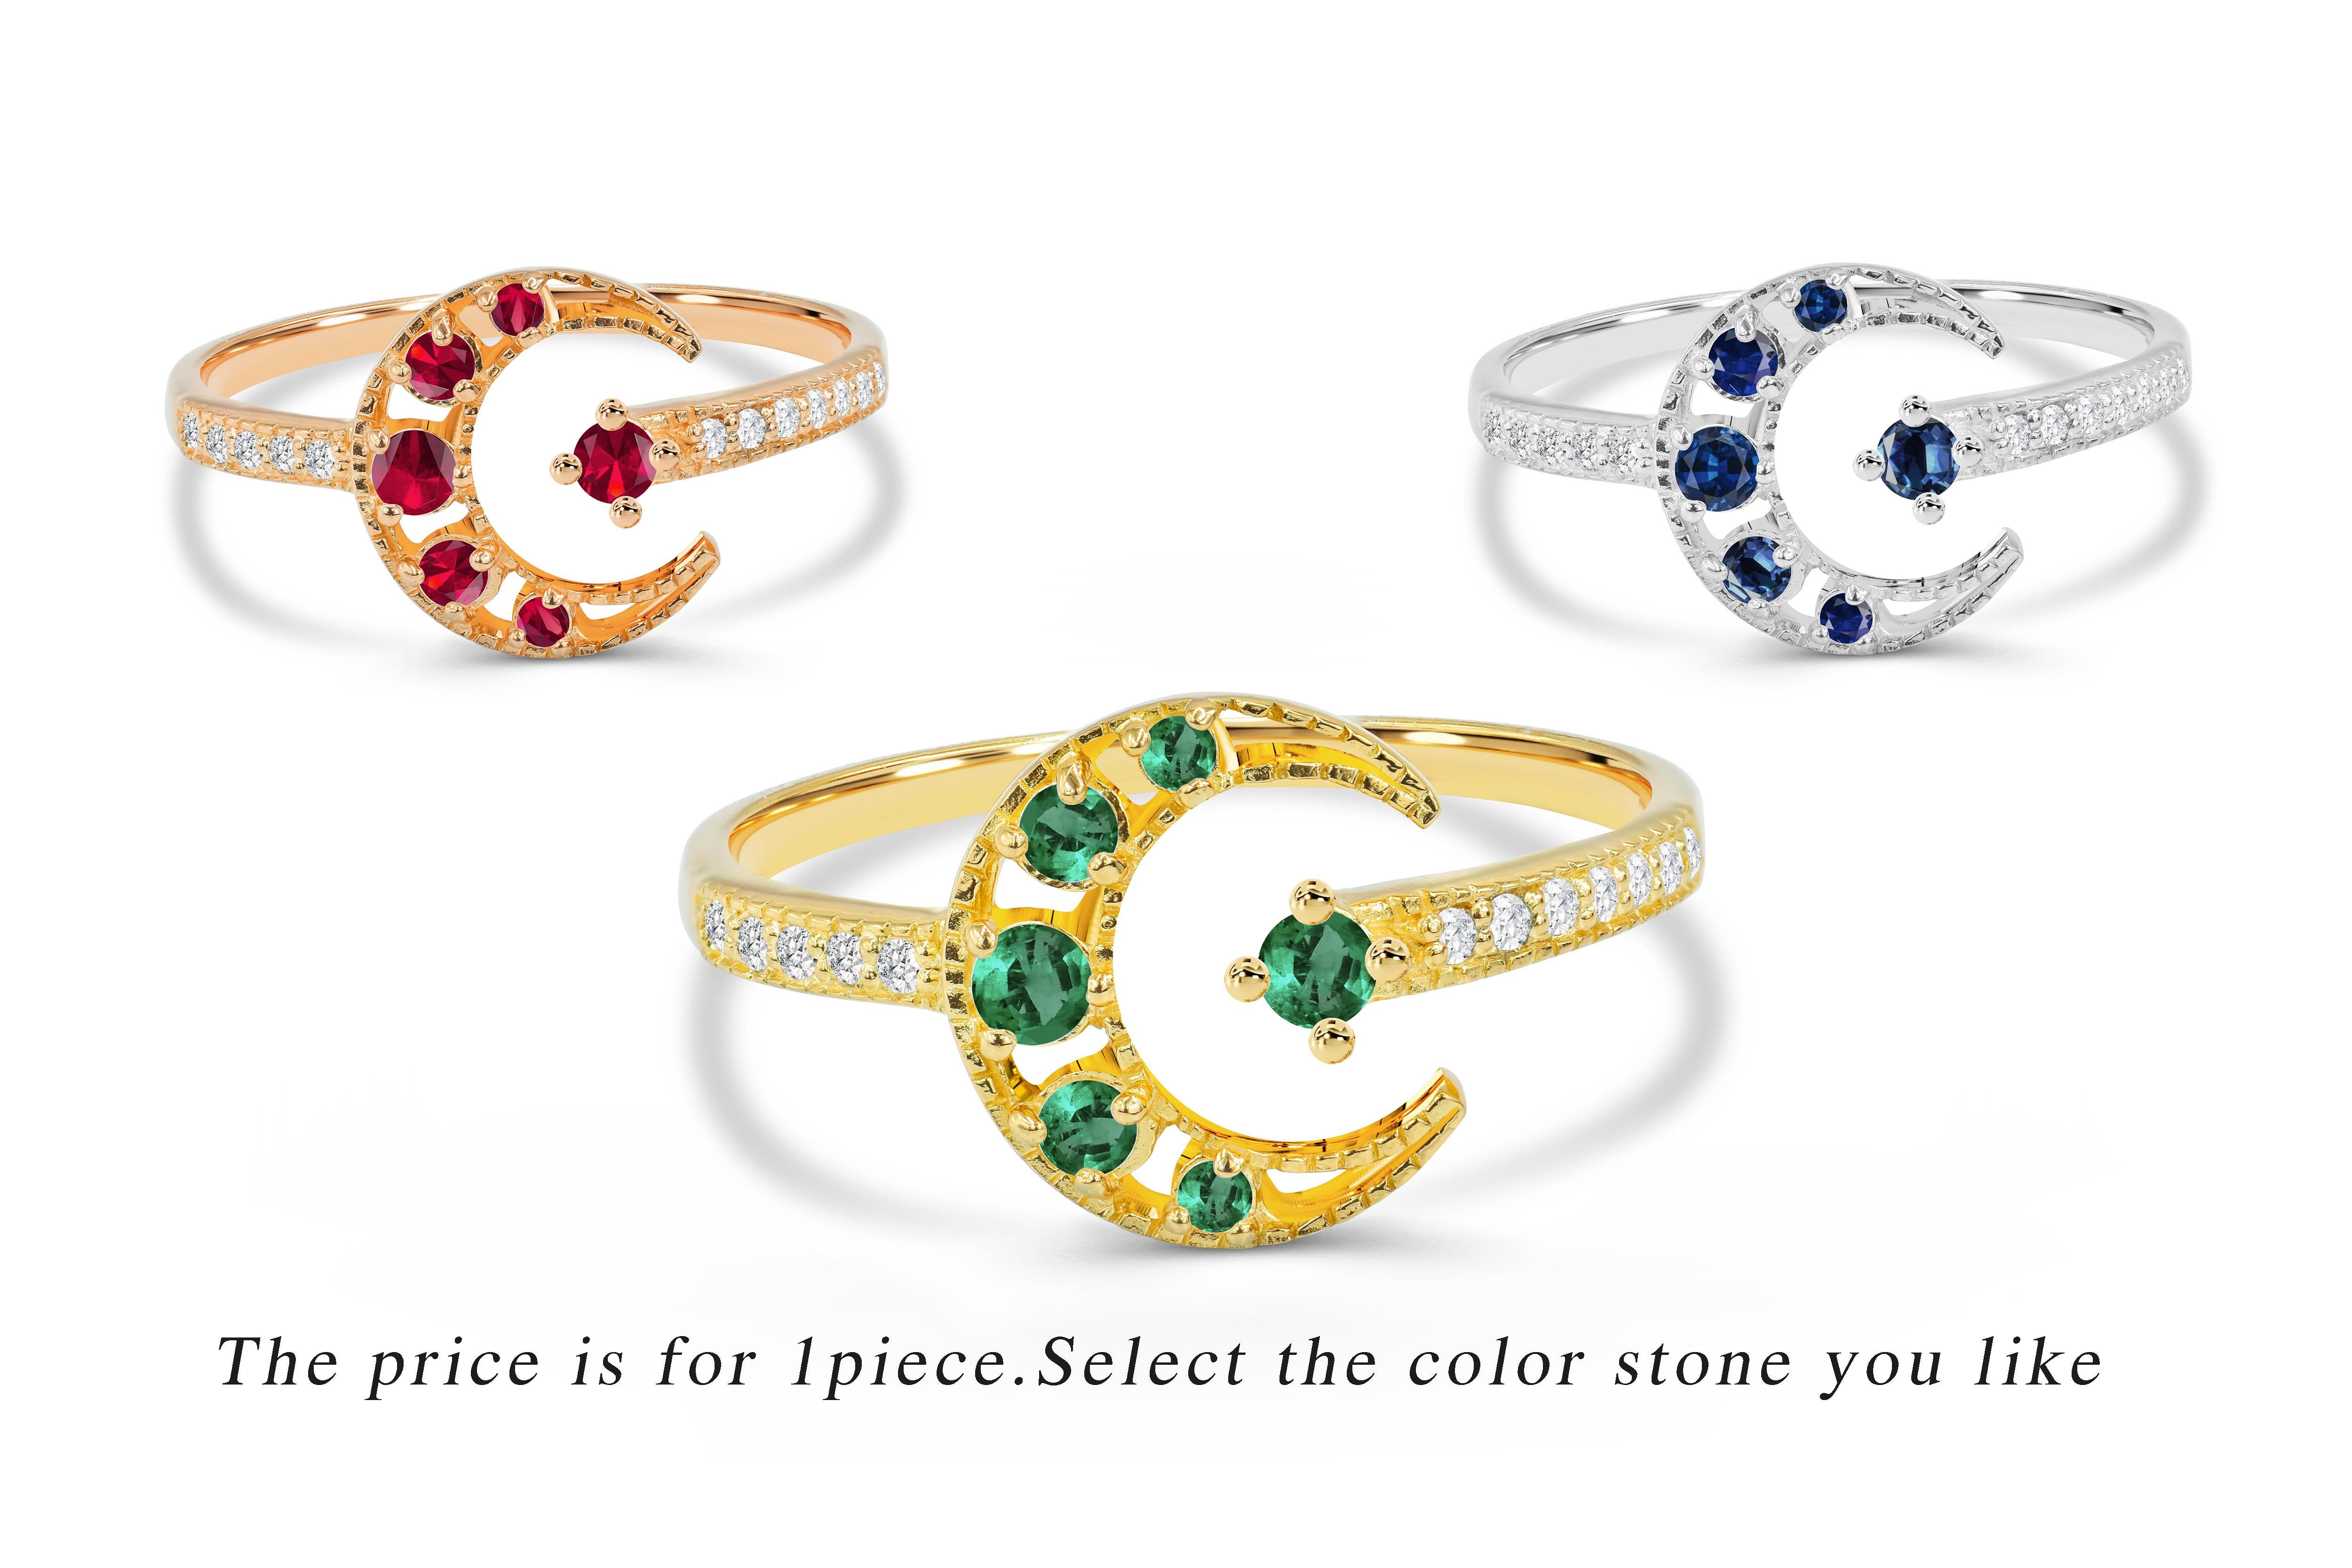 For Sale:  0.31 Ct Emerald, Ruby and Sapphire Crescent Moon Diamond Ring in 14K Gold